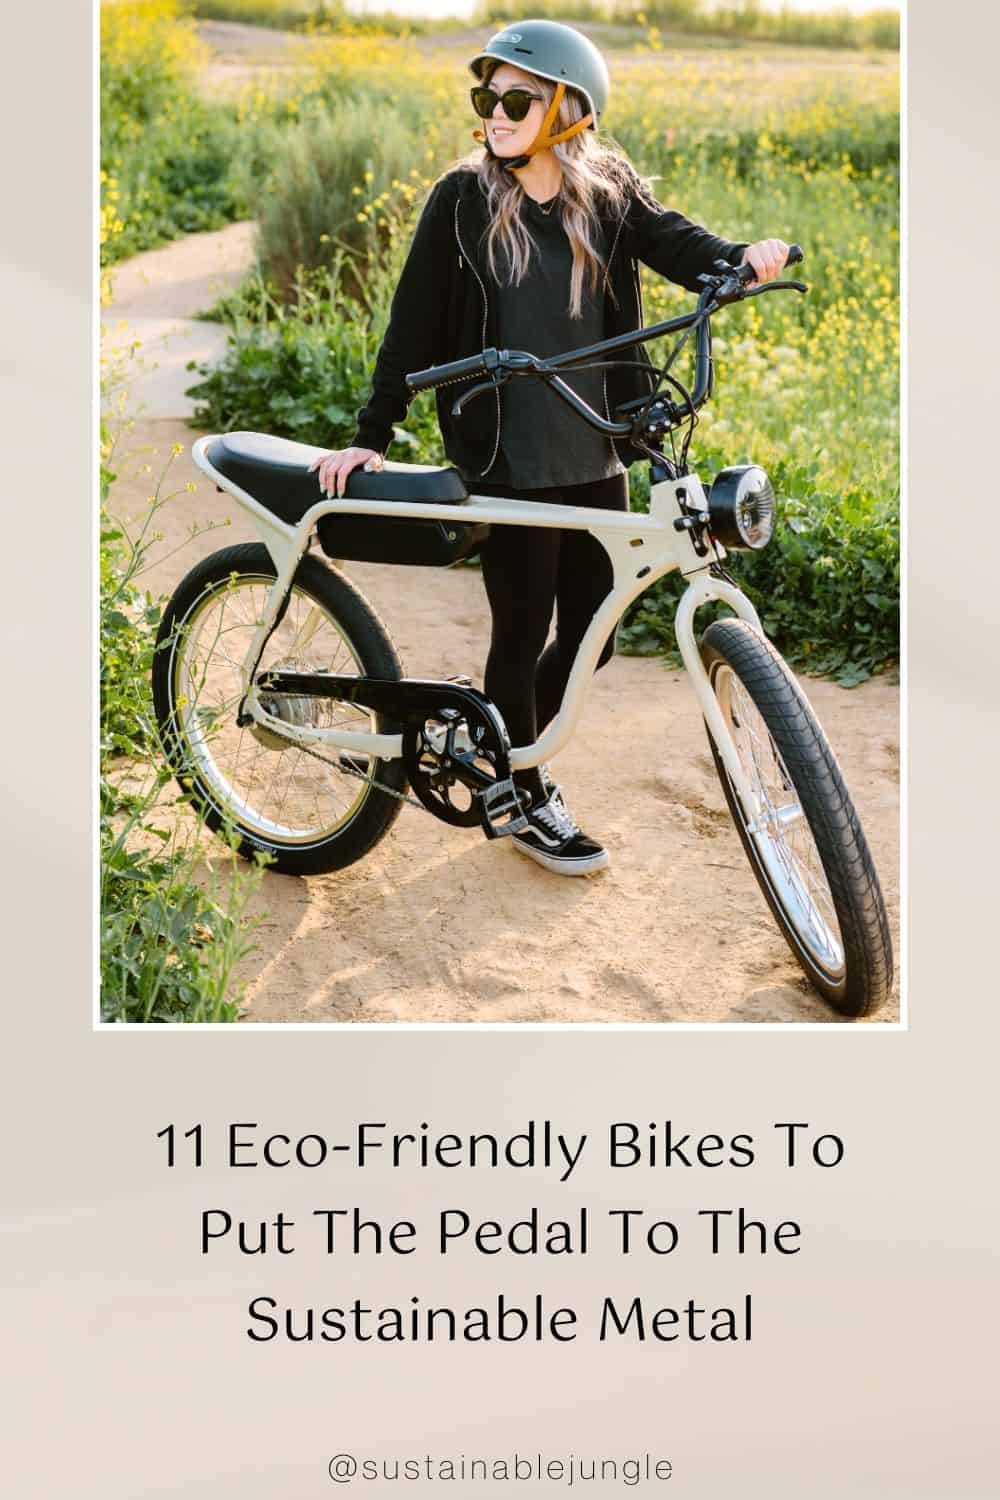 11 Eco-Friendly Bikes To Put The Pedal To The Sustainable Metal Image by Electric Bike Company #ecofriendlybikes #sustainablebikes #arebikesecofriendly #sustainablebikebrands #recycledbikes #sustainablebicycled #sustainablejungle